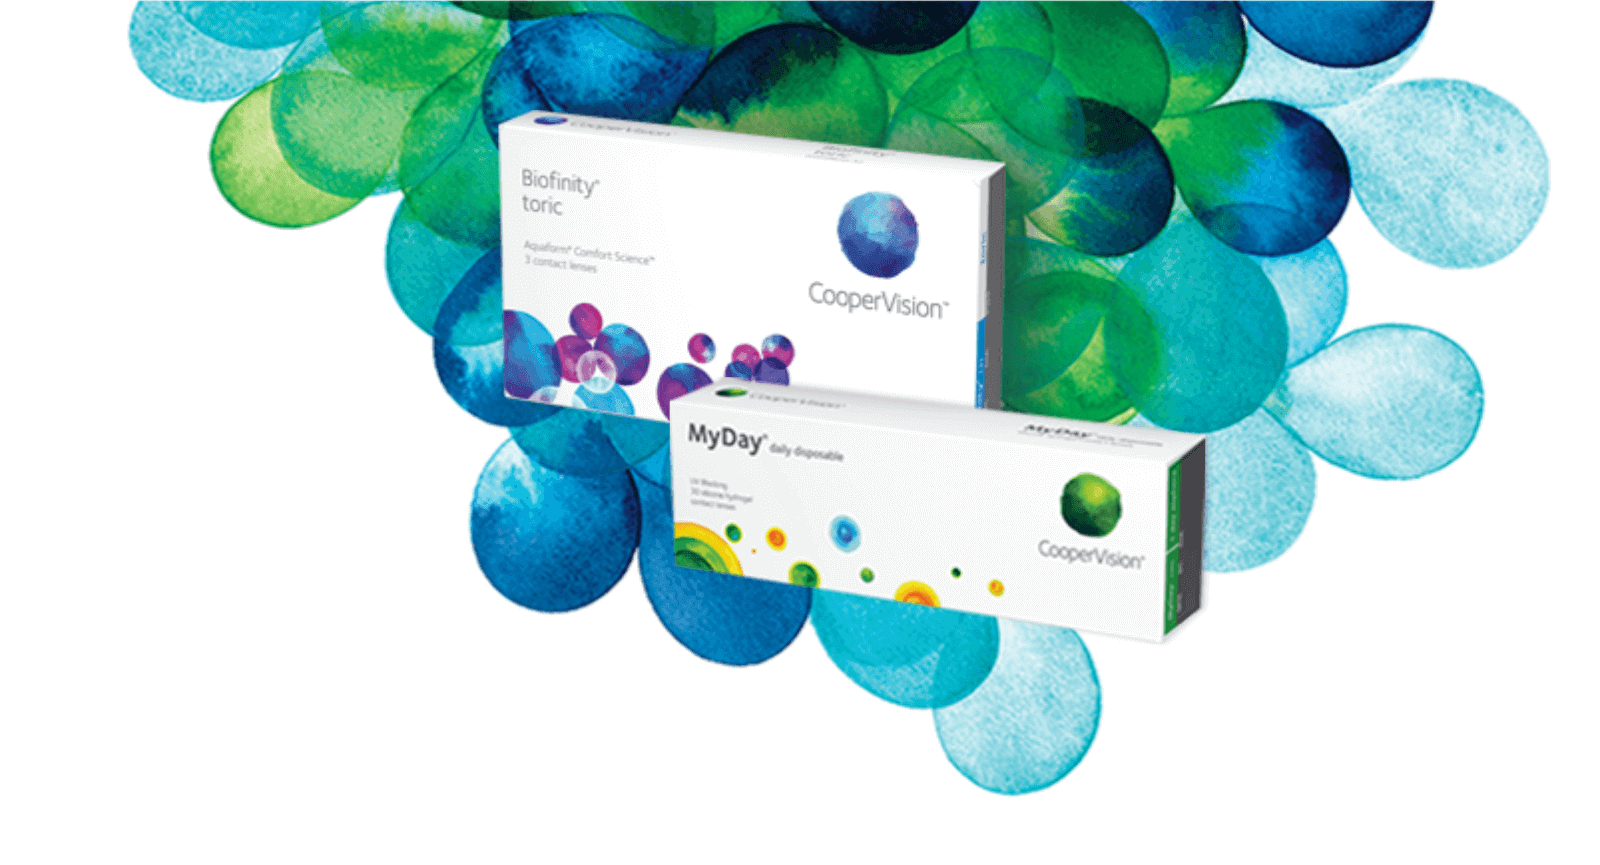 MyDay and Biofinity toric contact lens boxes